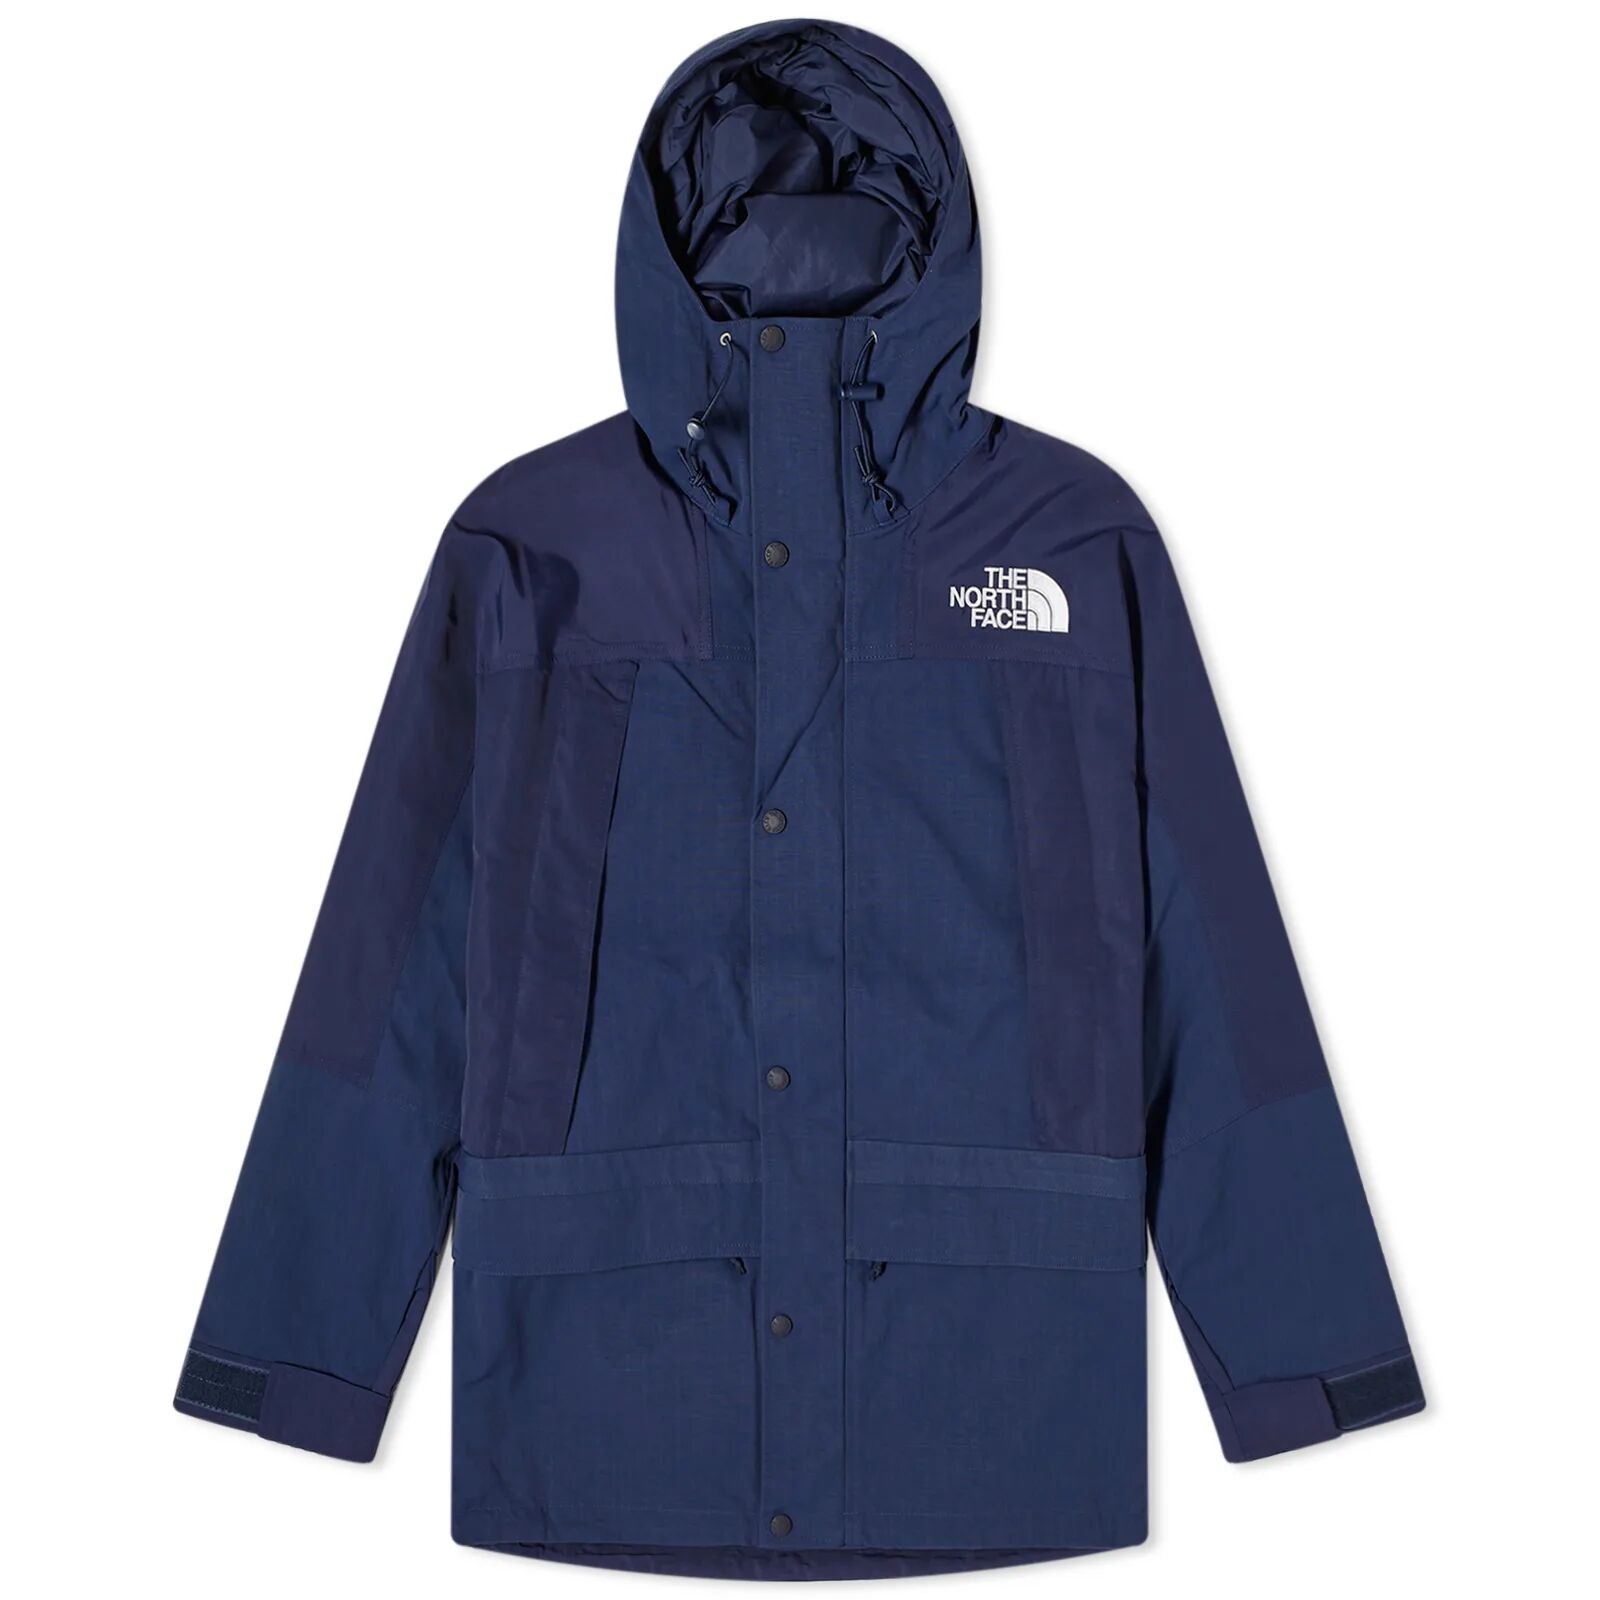 The North Face Men's Ripstop Mountain Cargo Jacket in Summit Navy, Size X-Large